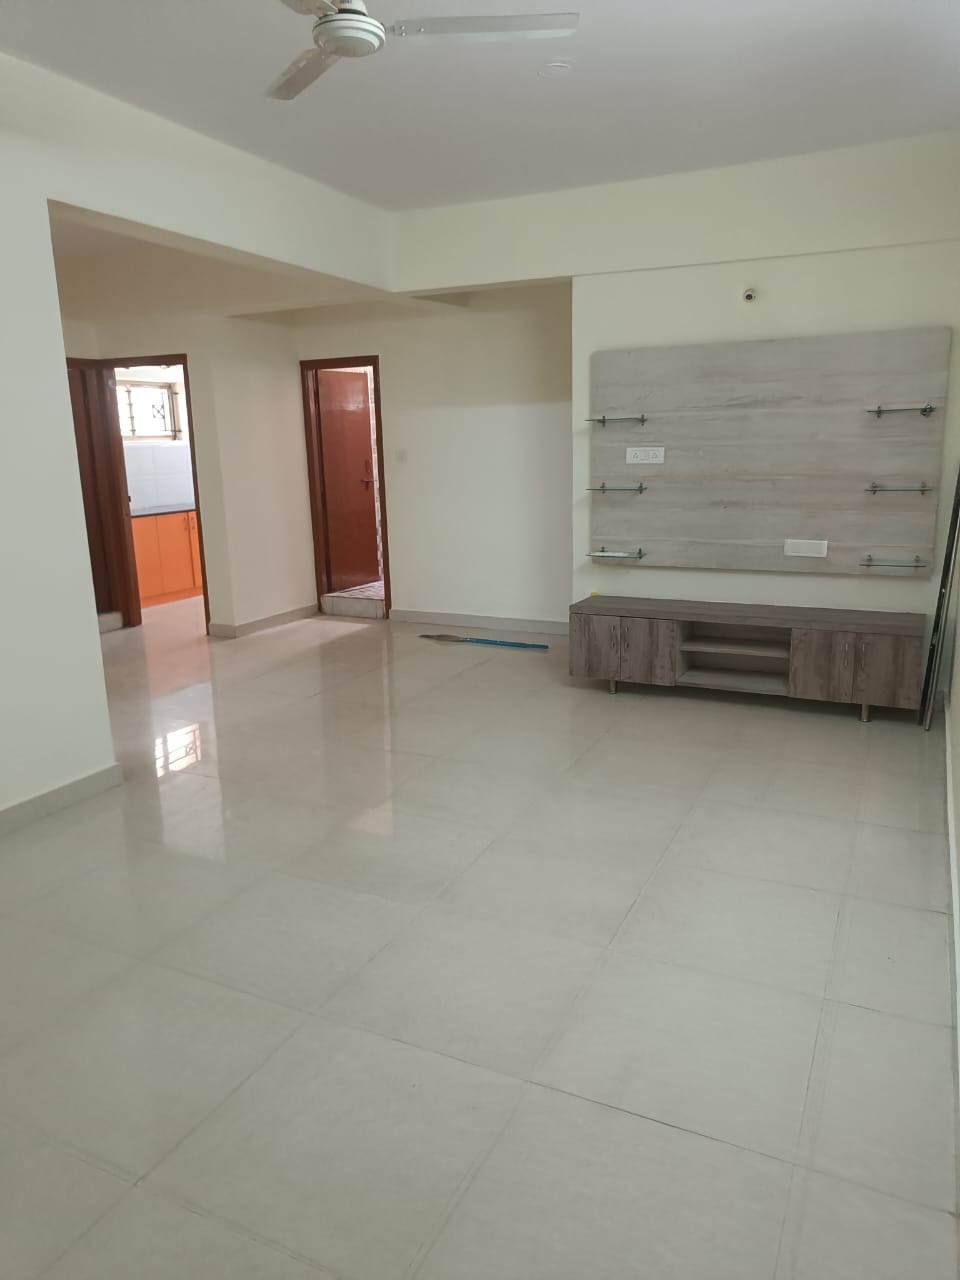 3 BHK Independent House for Lease Only at JAML2 - 2654 in Dodda Bommasandra